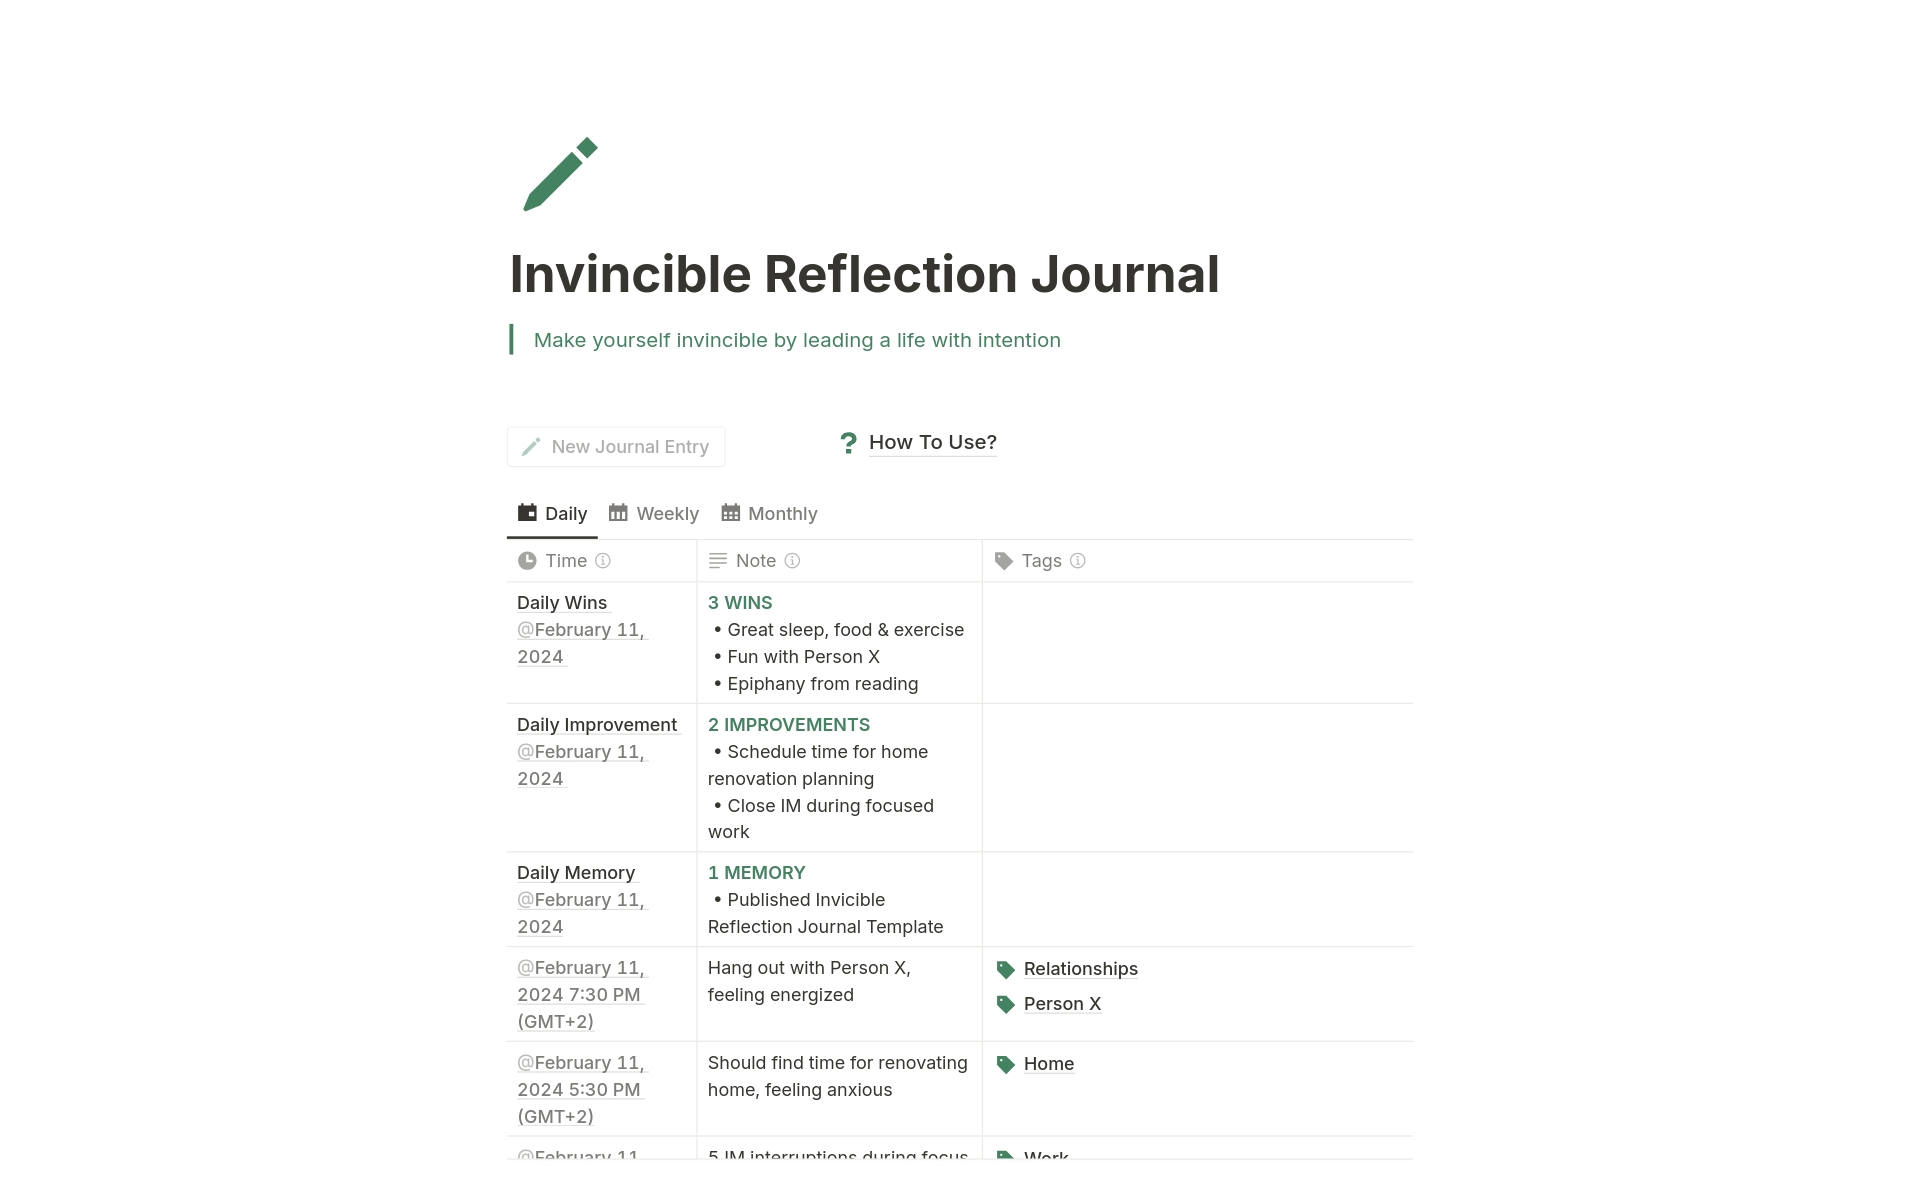 Invincible Reflection Journal combines both the tool and process for journaling and reflection. Perform check ins to document your life, turn them into daily 1-minute reflections, weekly reflections and monthly long form writing about your life categories.